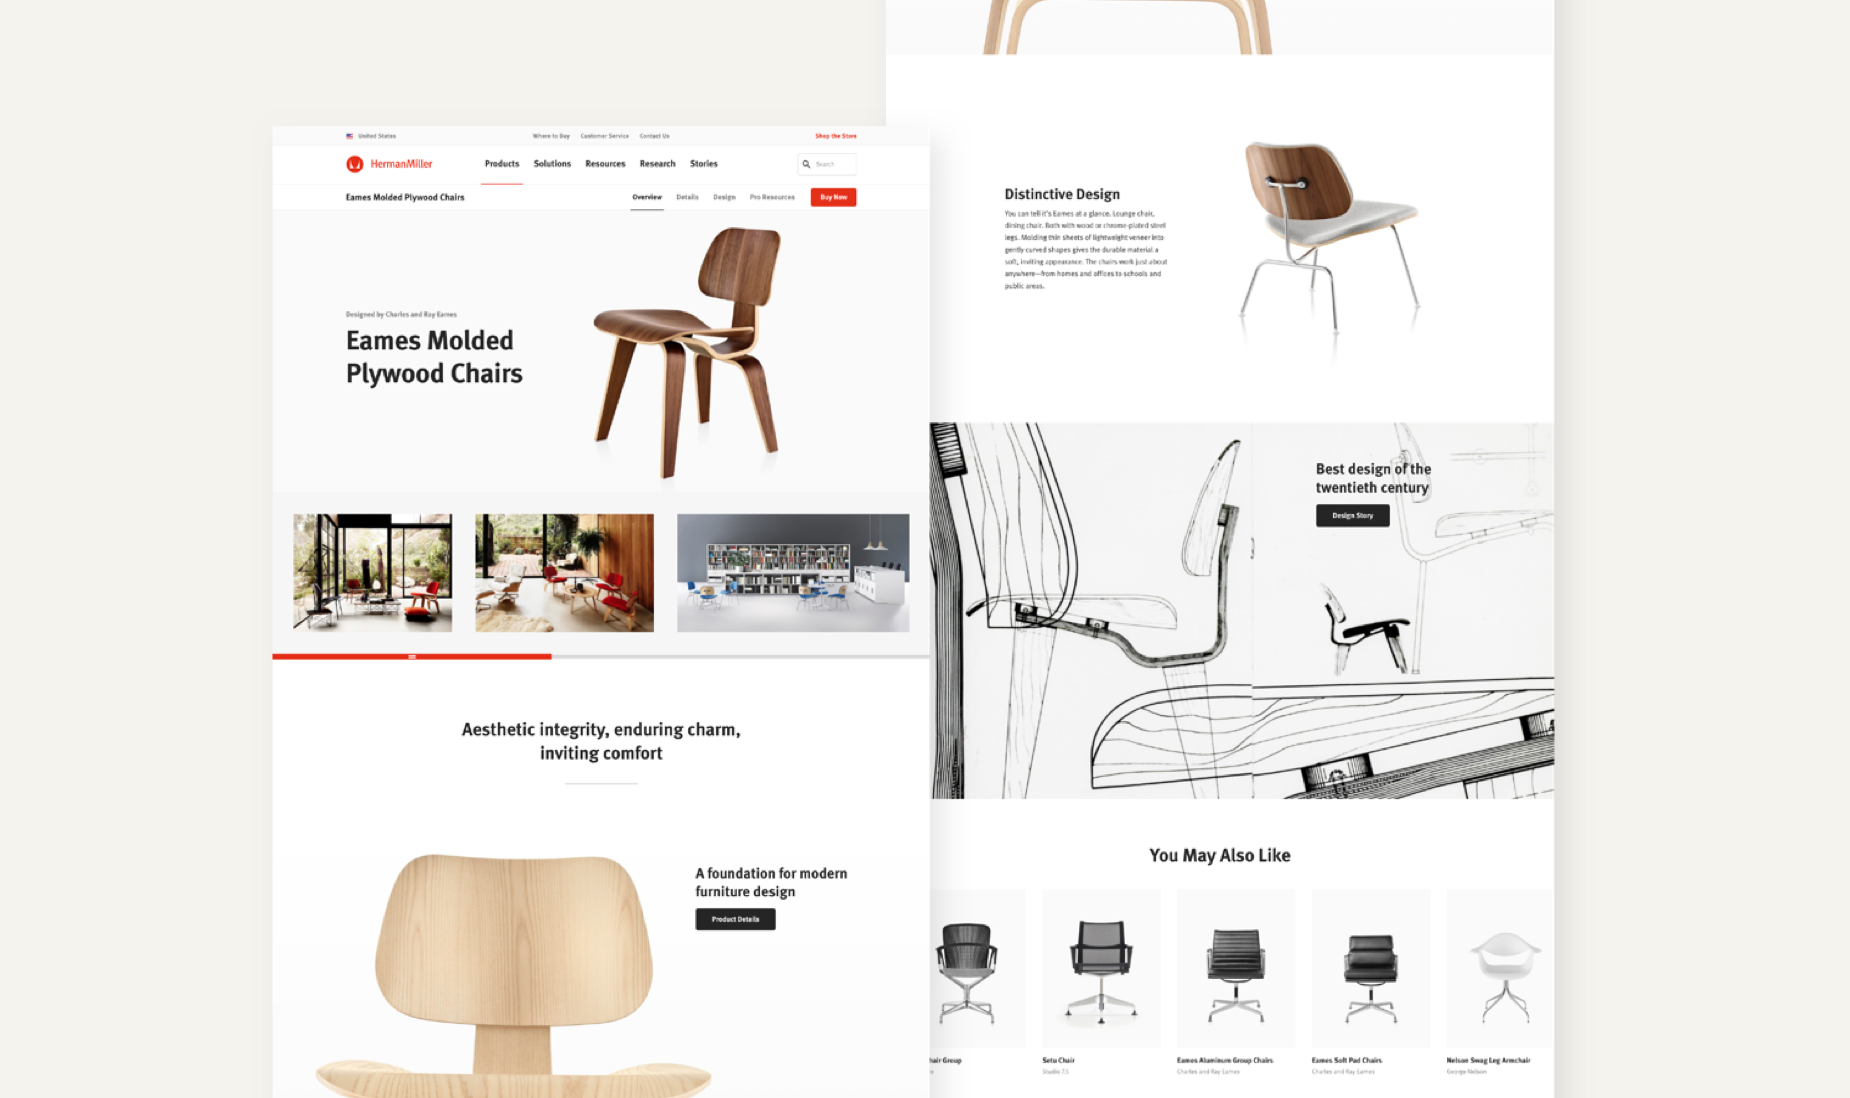 Example product page of Eames Molded Plywood Chairs.